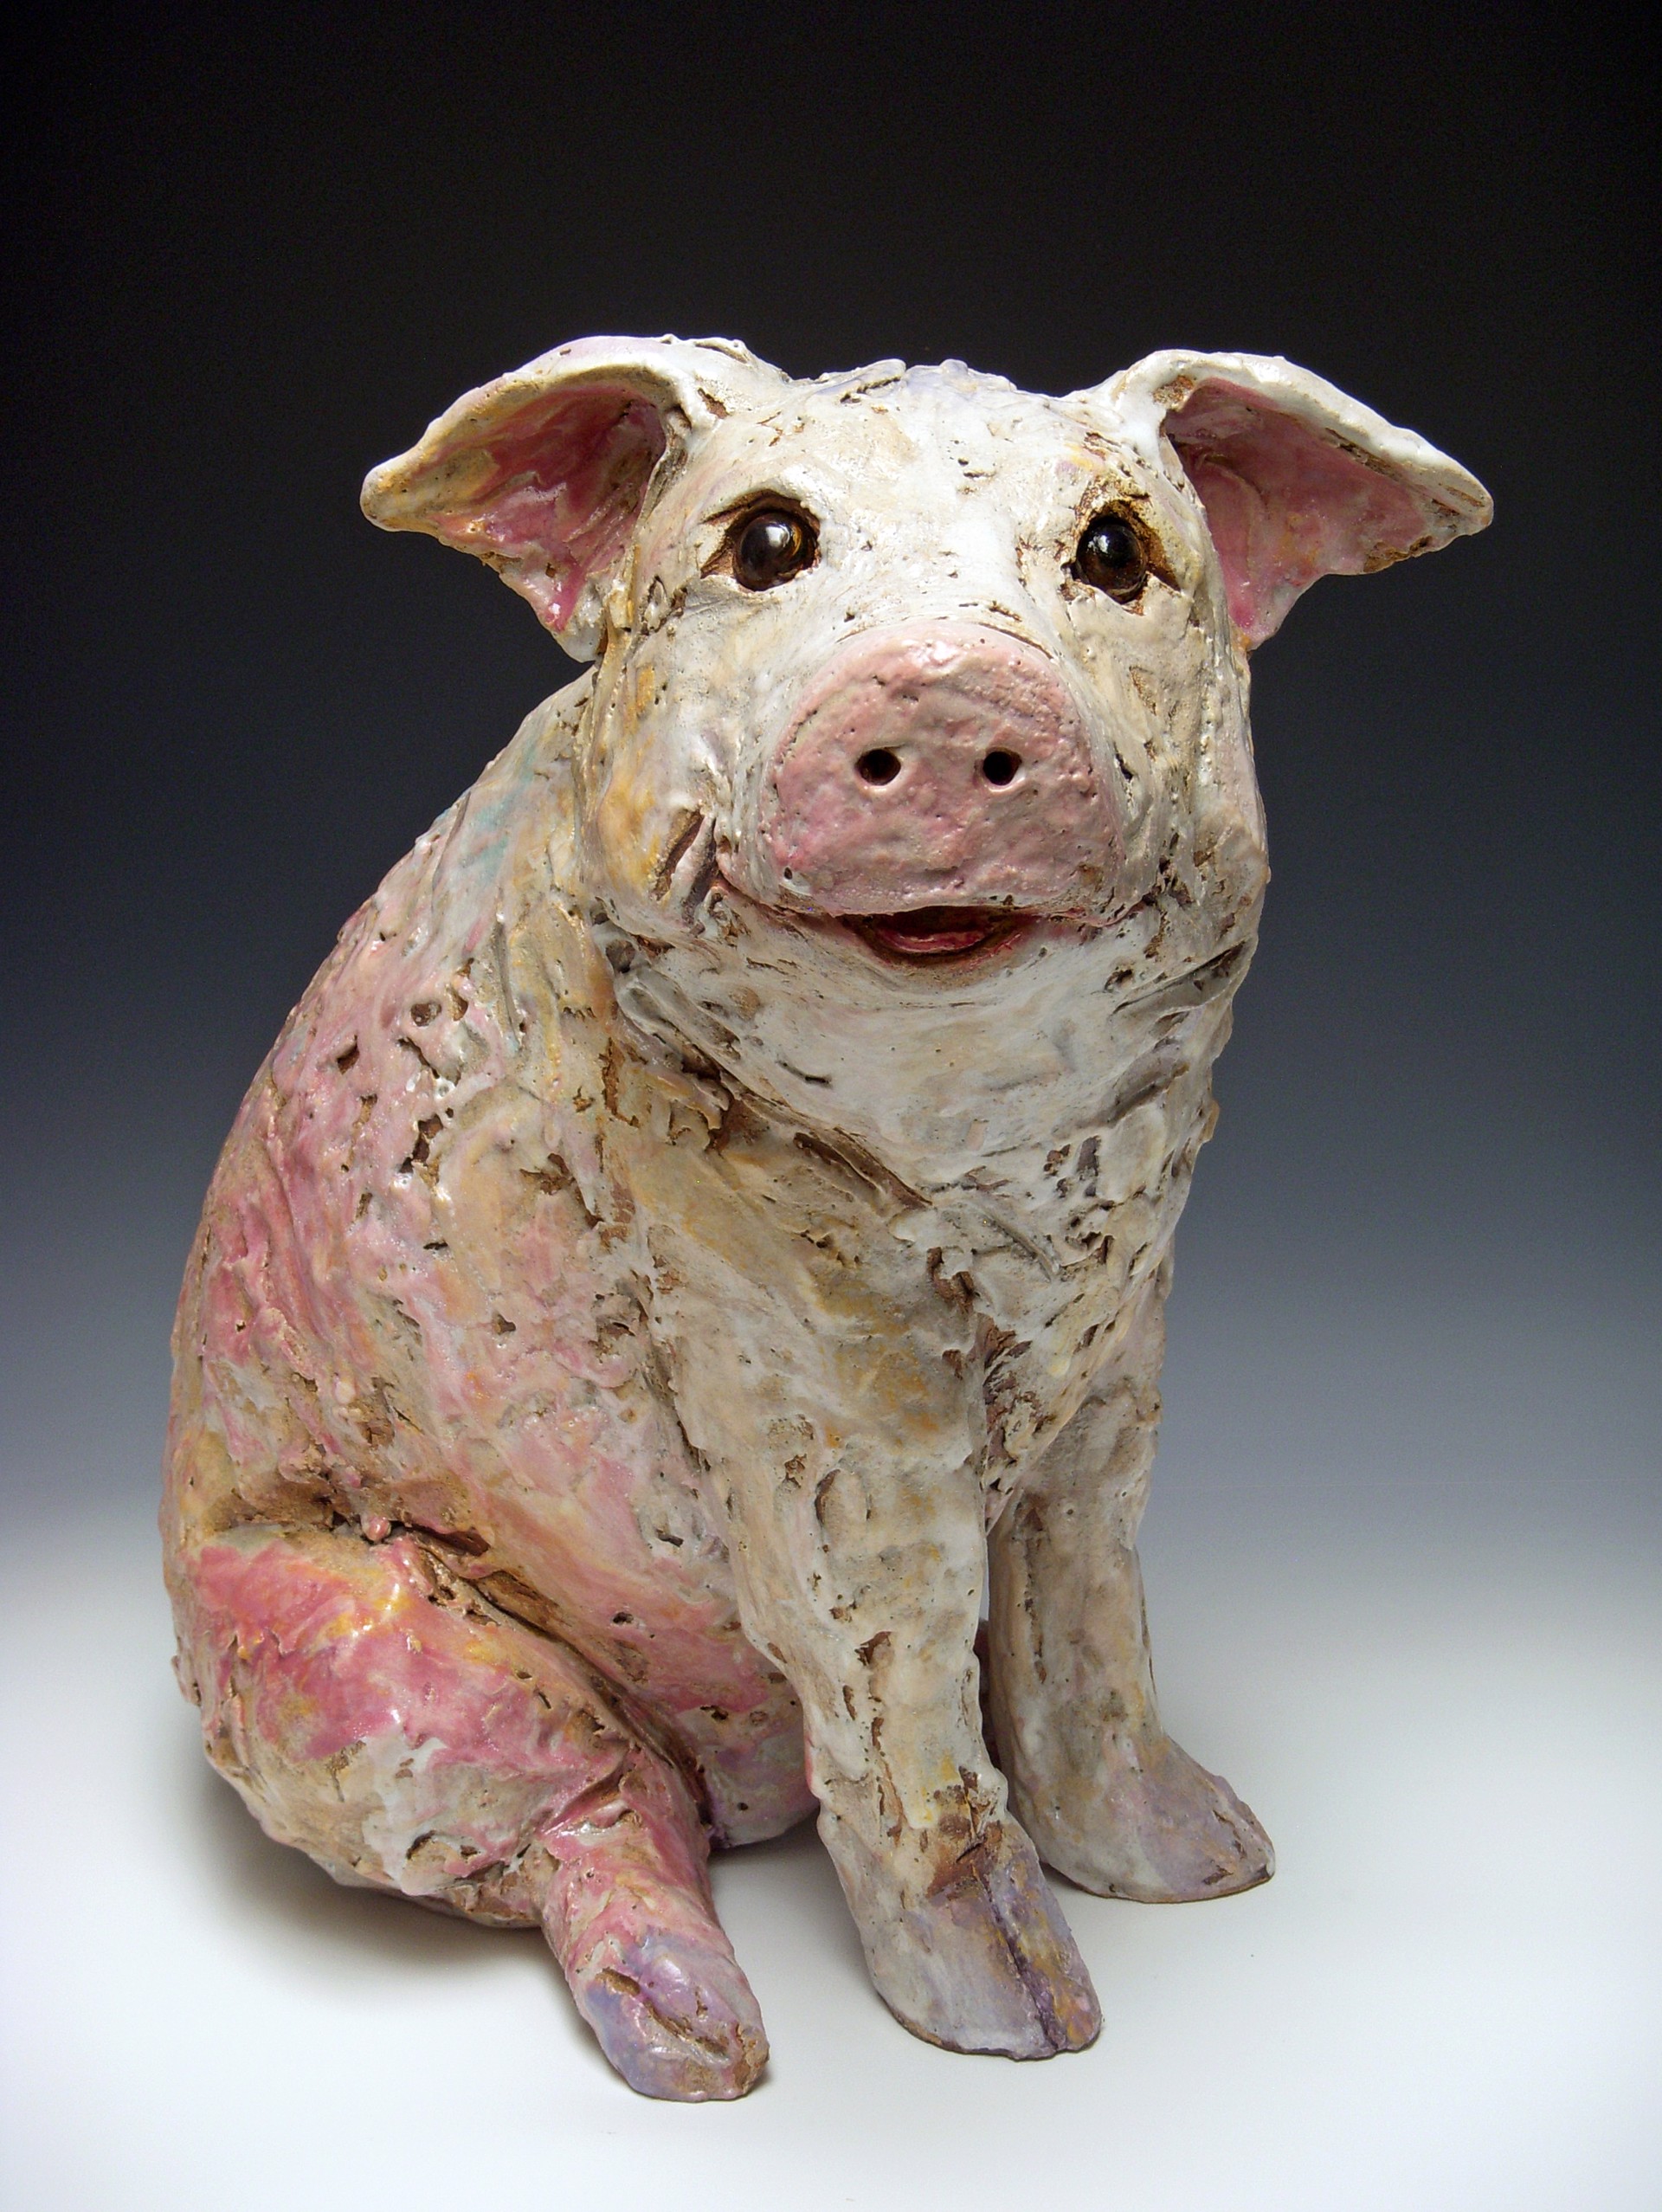 Chester (the pig) by Kari Rives